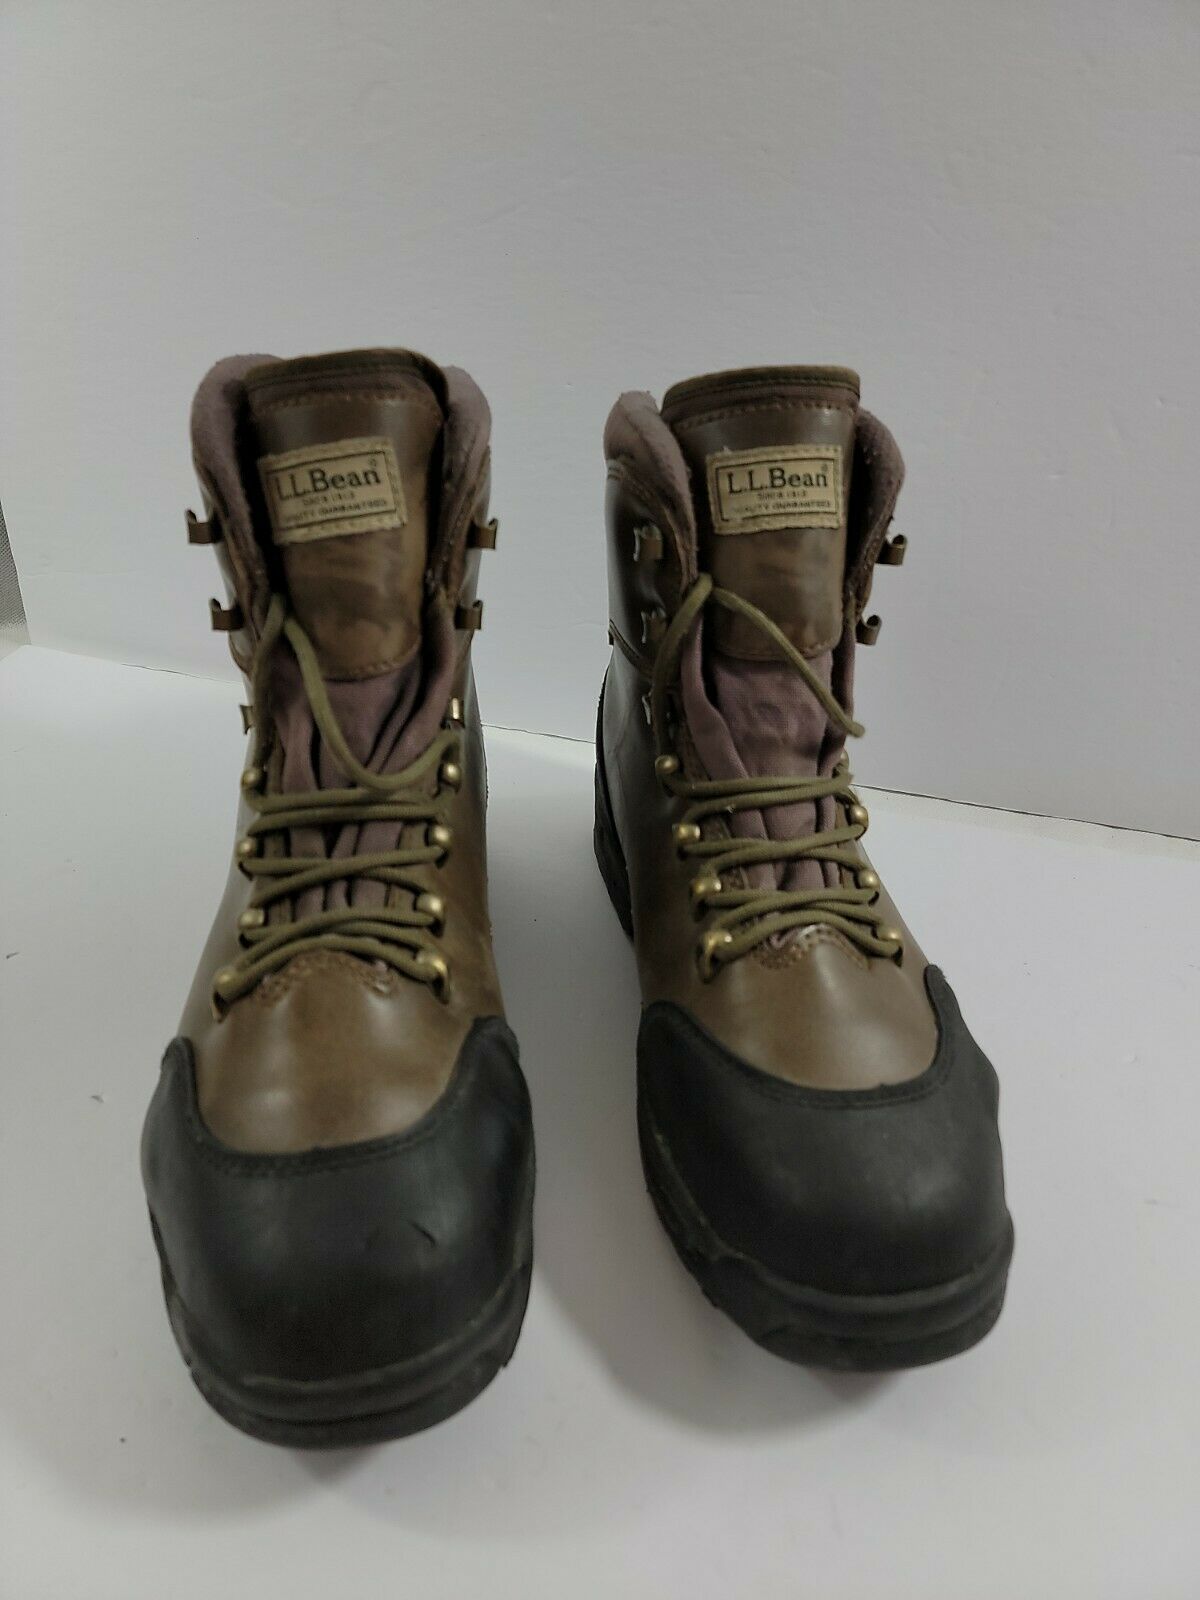 LL BEAN FLY FISHING BOOTS STUDDED RIVER TREADS AQUA STEALTH Size 9